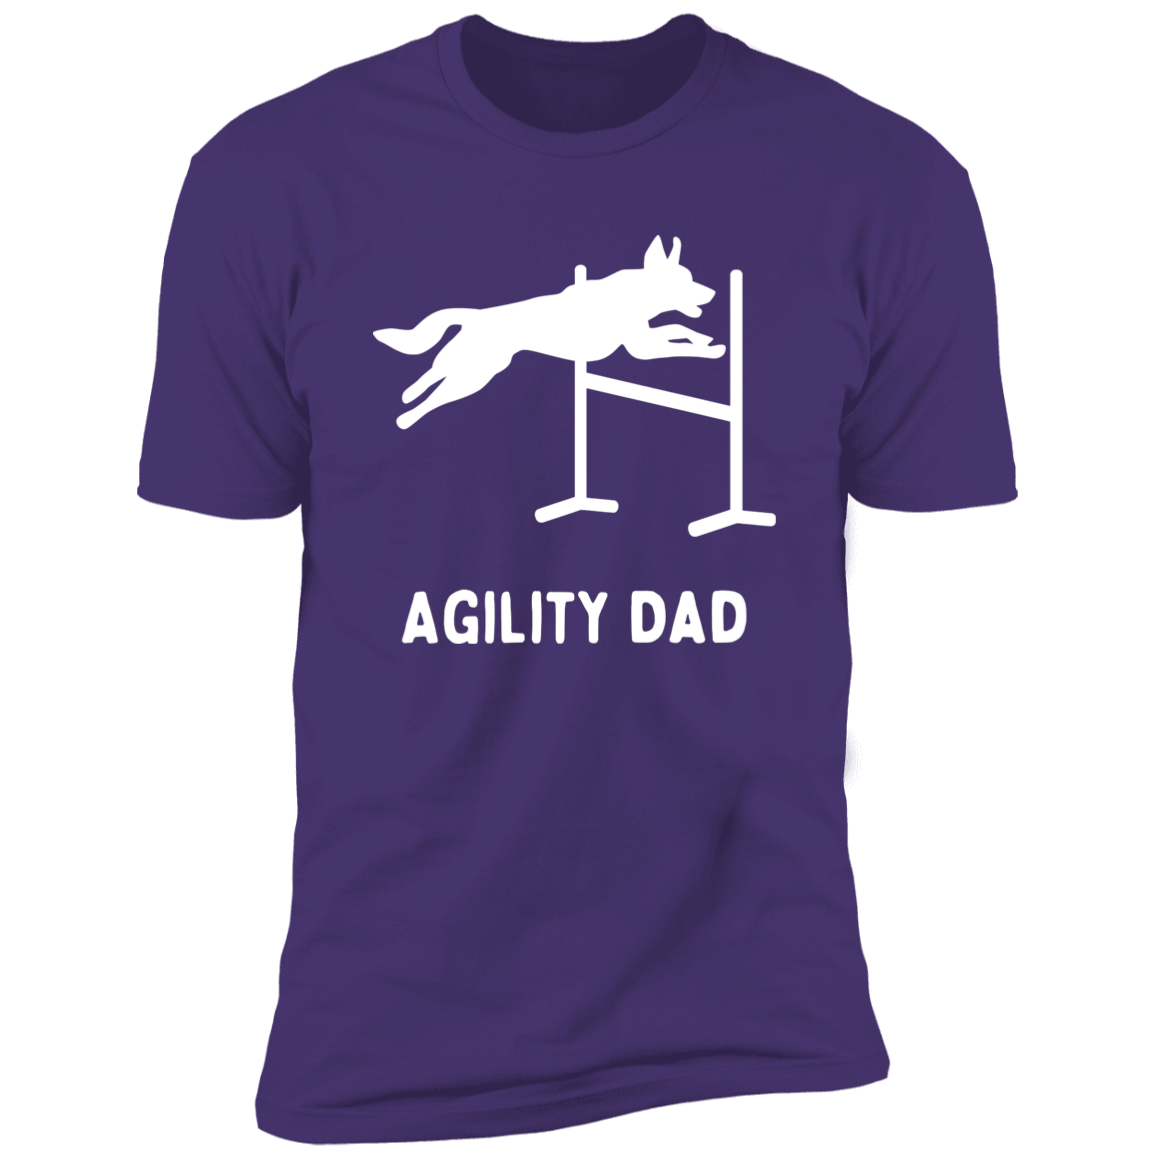 Agility Dad Agility Dog Dog T-Shirt for humans, in purple rush